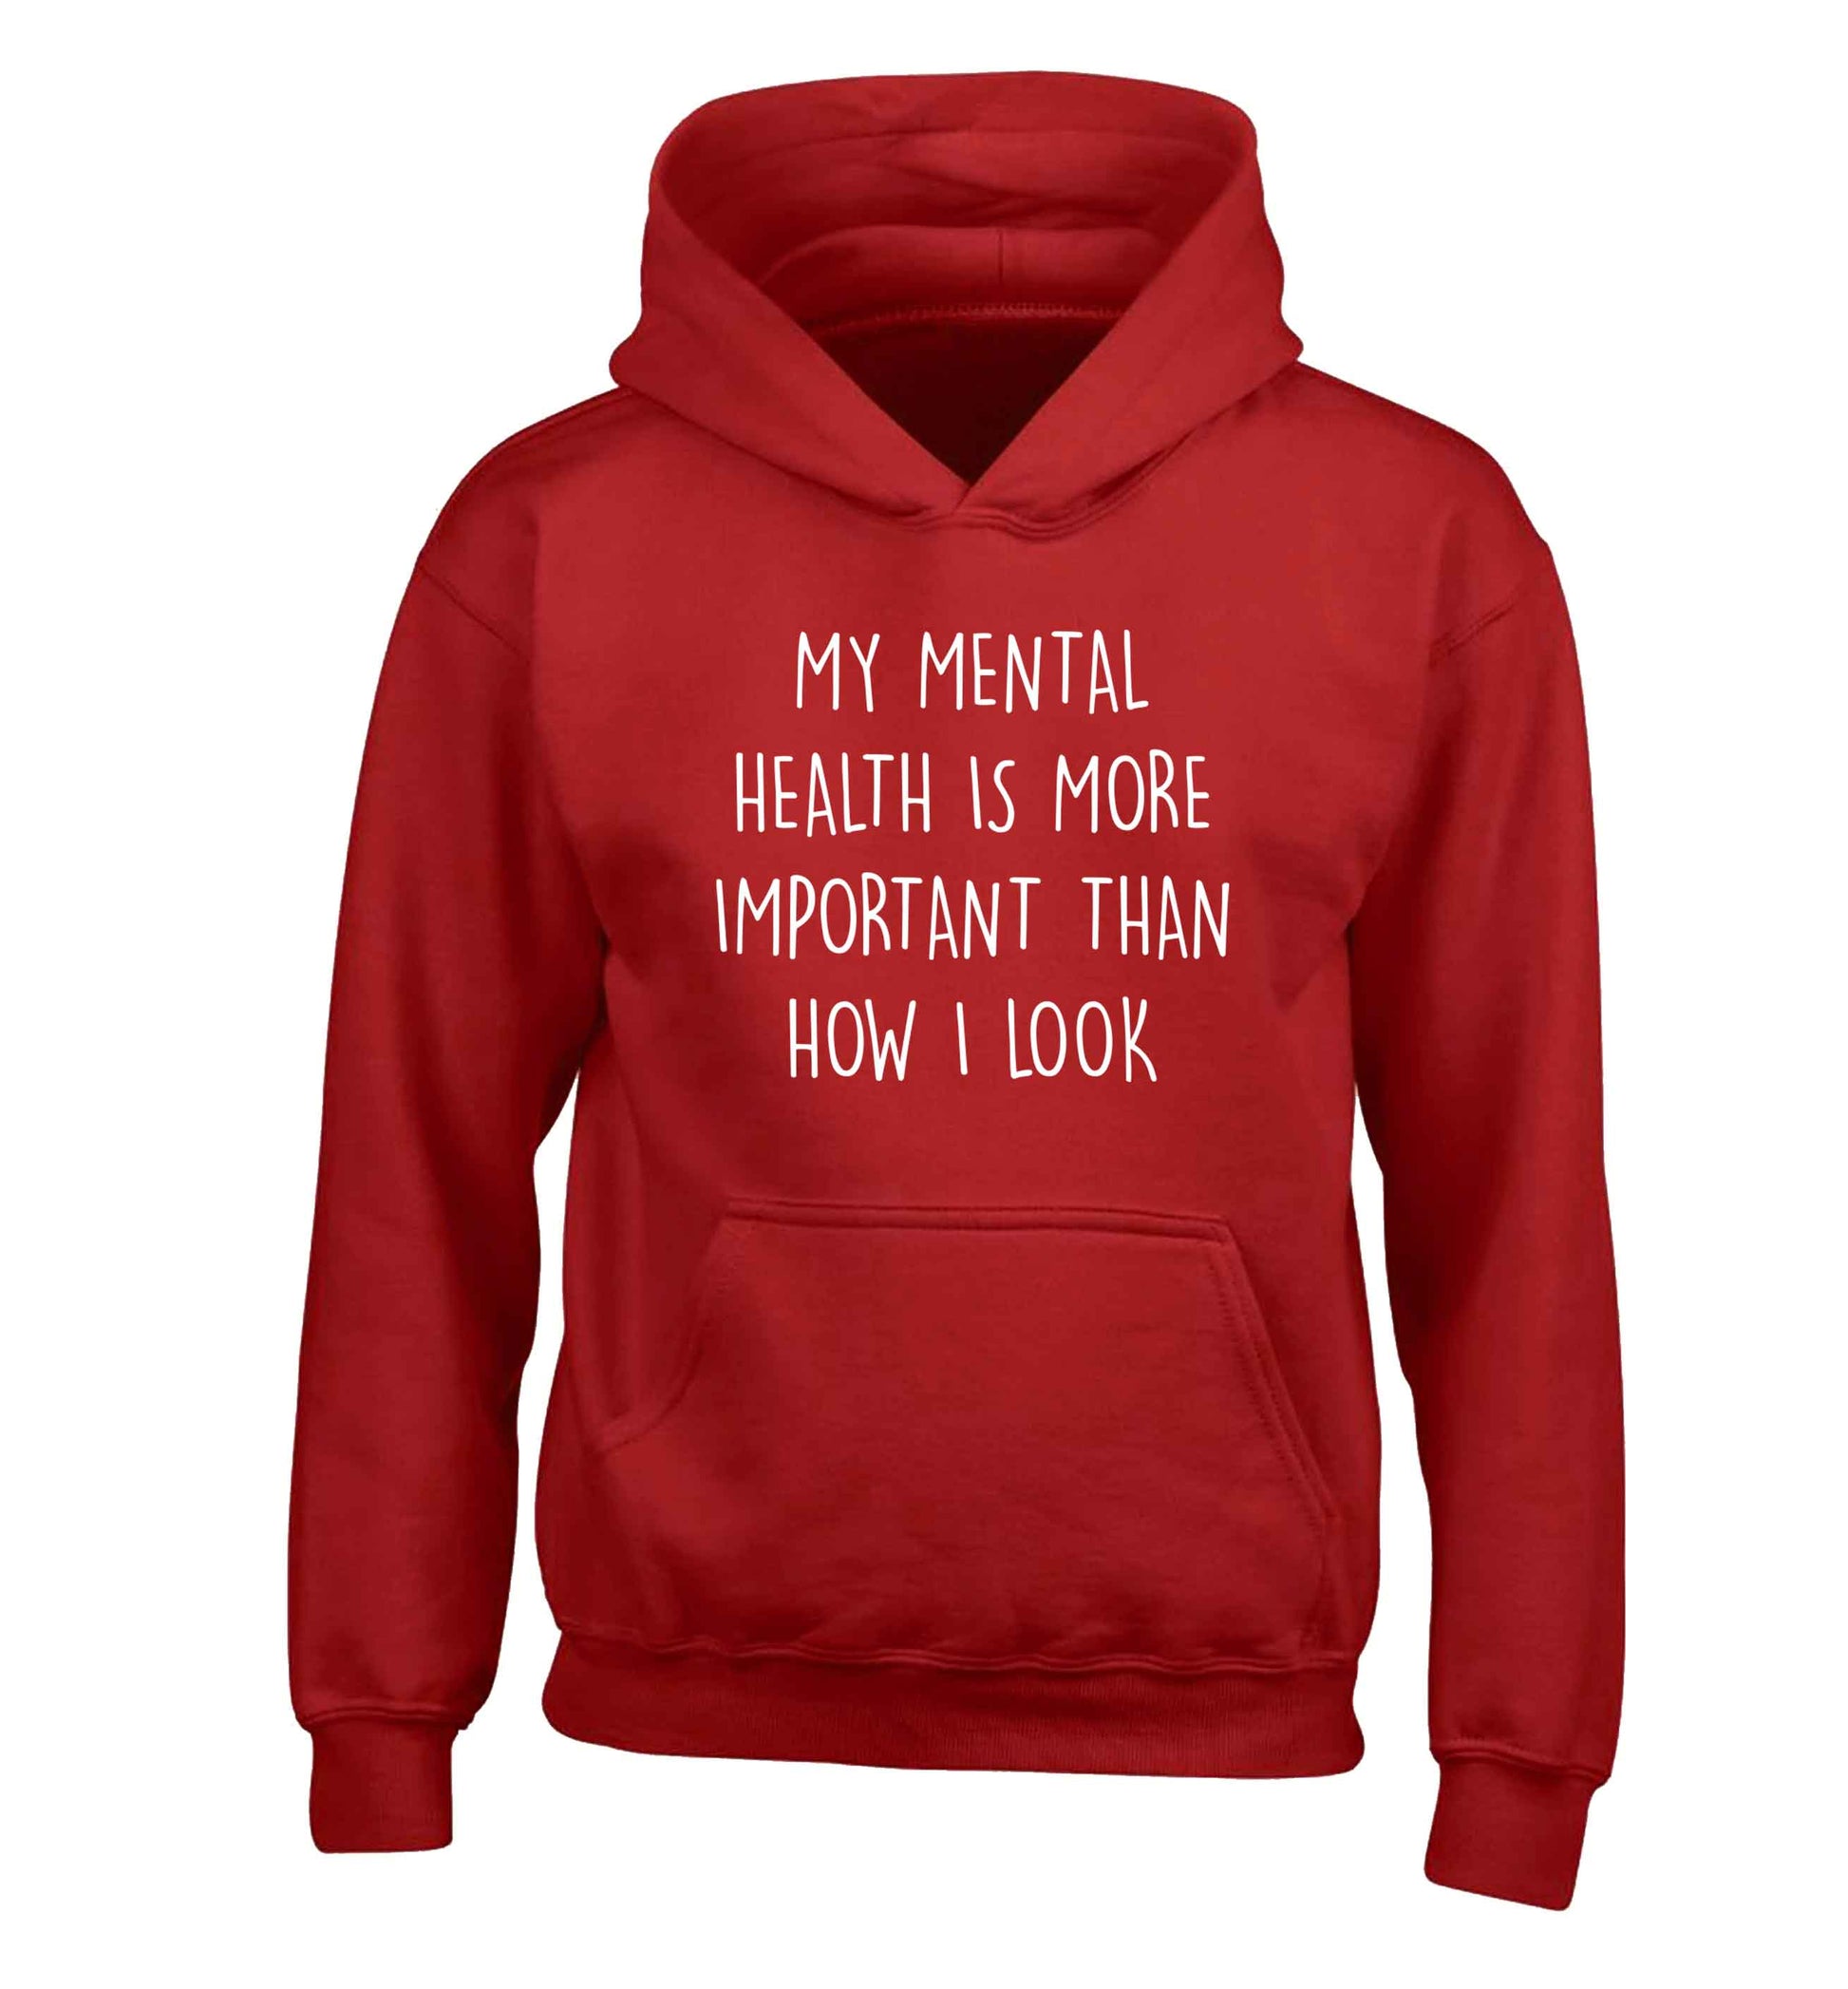 My mental health is more importnat than how I look children's red hoodie 12-13 Years